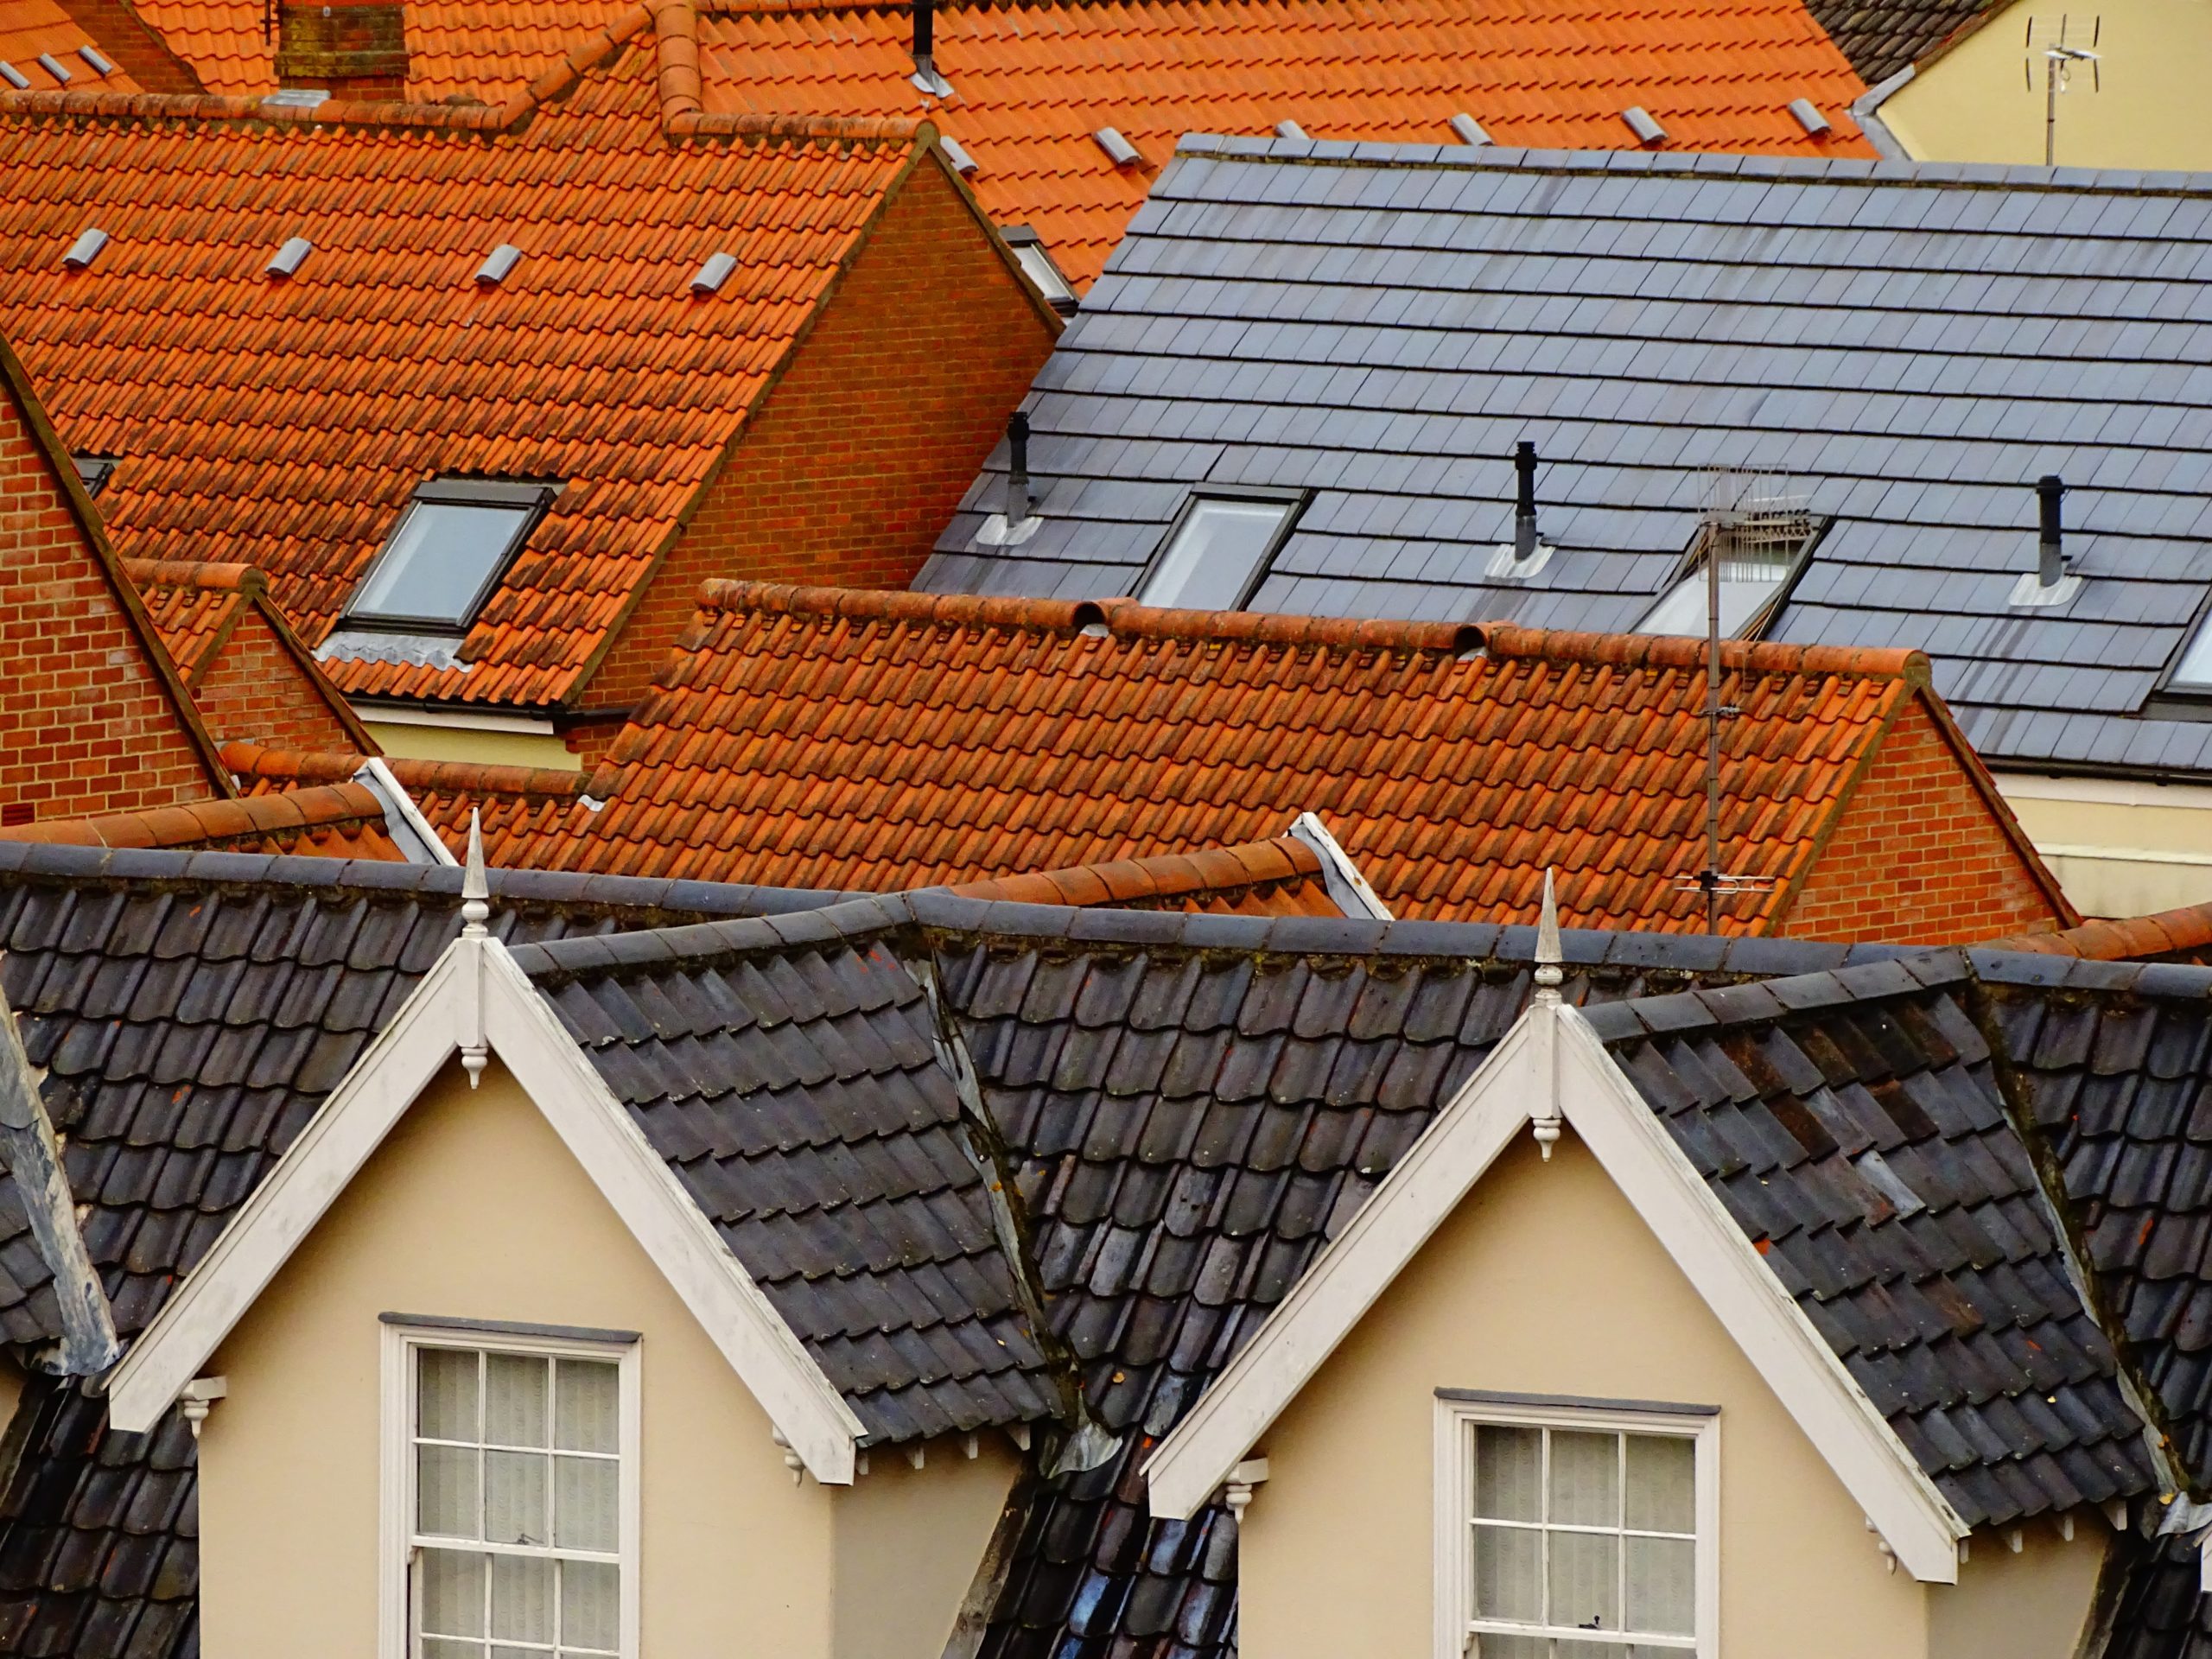 7 different types of roofing to consider when roofing your house